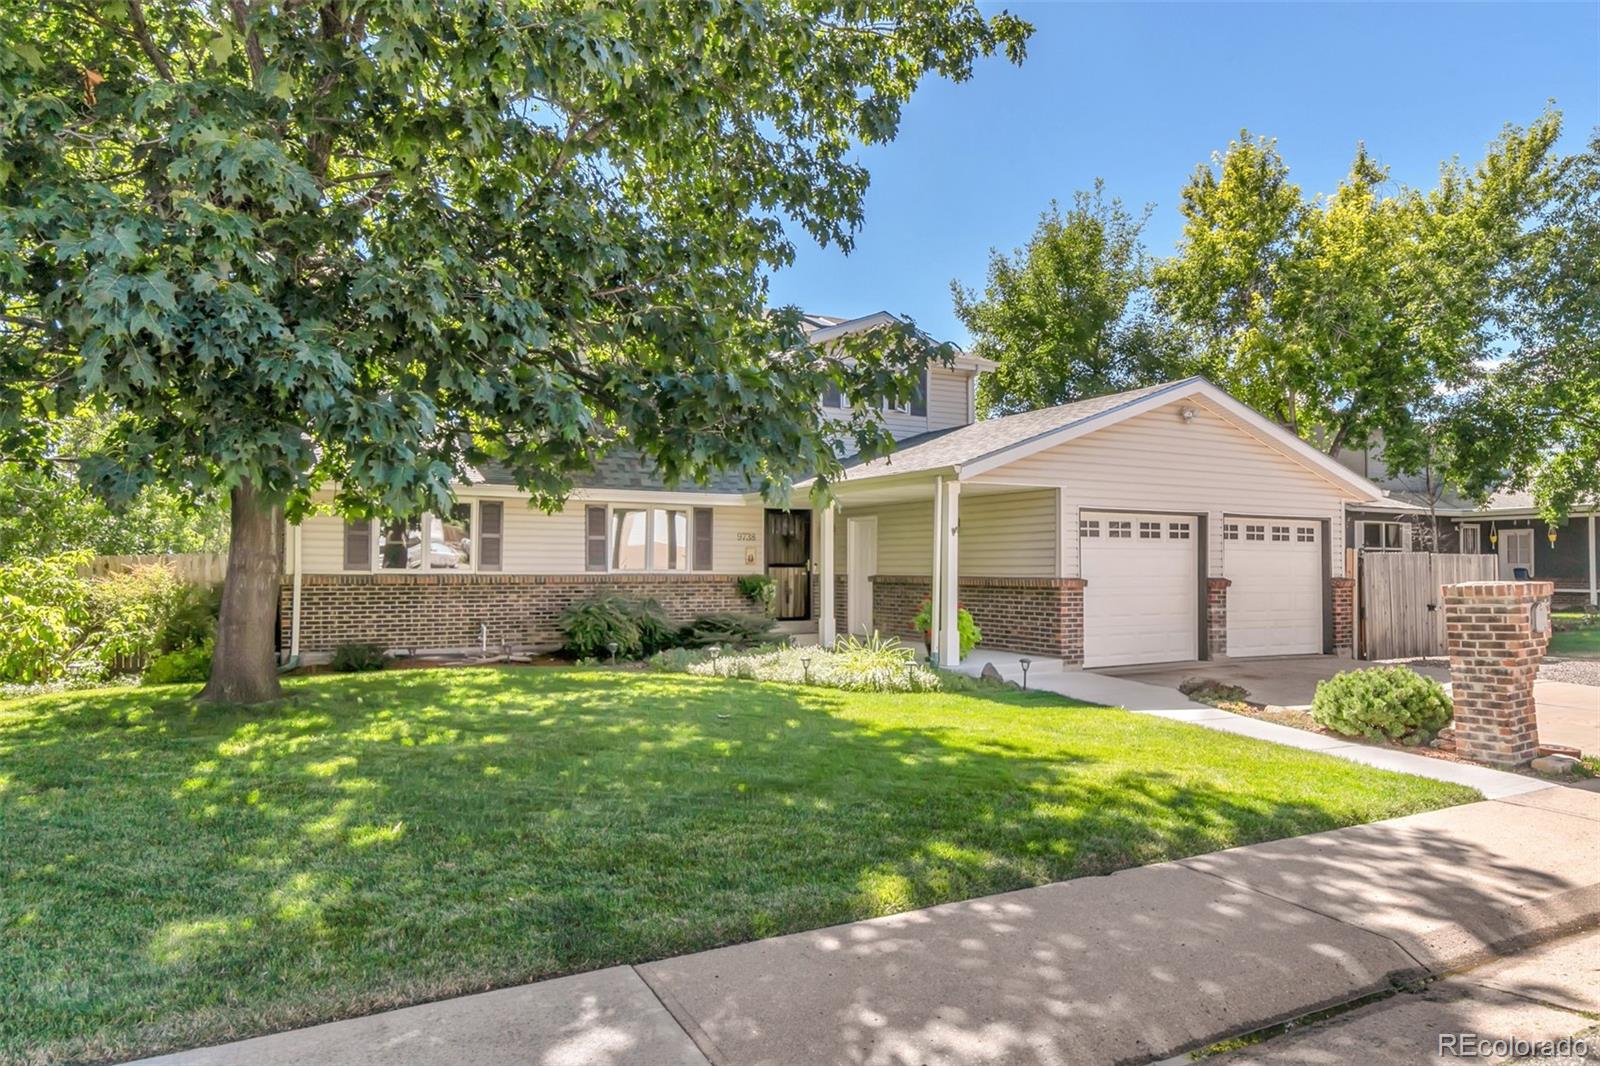 Report Image for 9738 W 74th Place,Arvada, Colorado